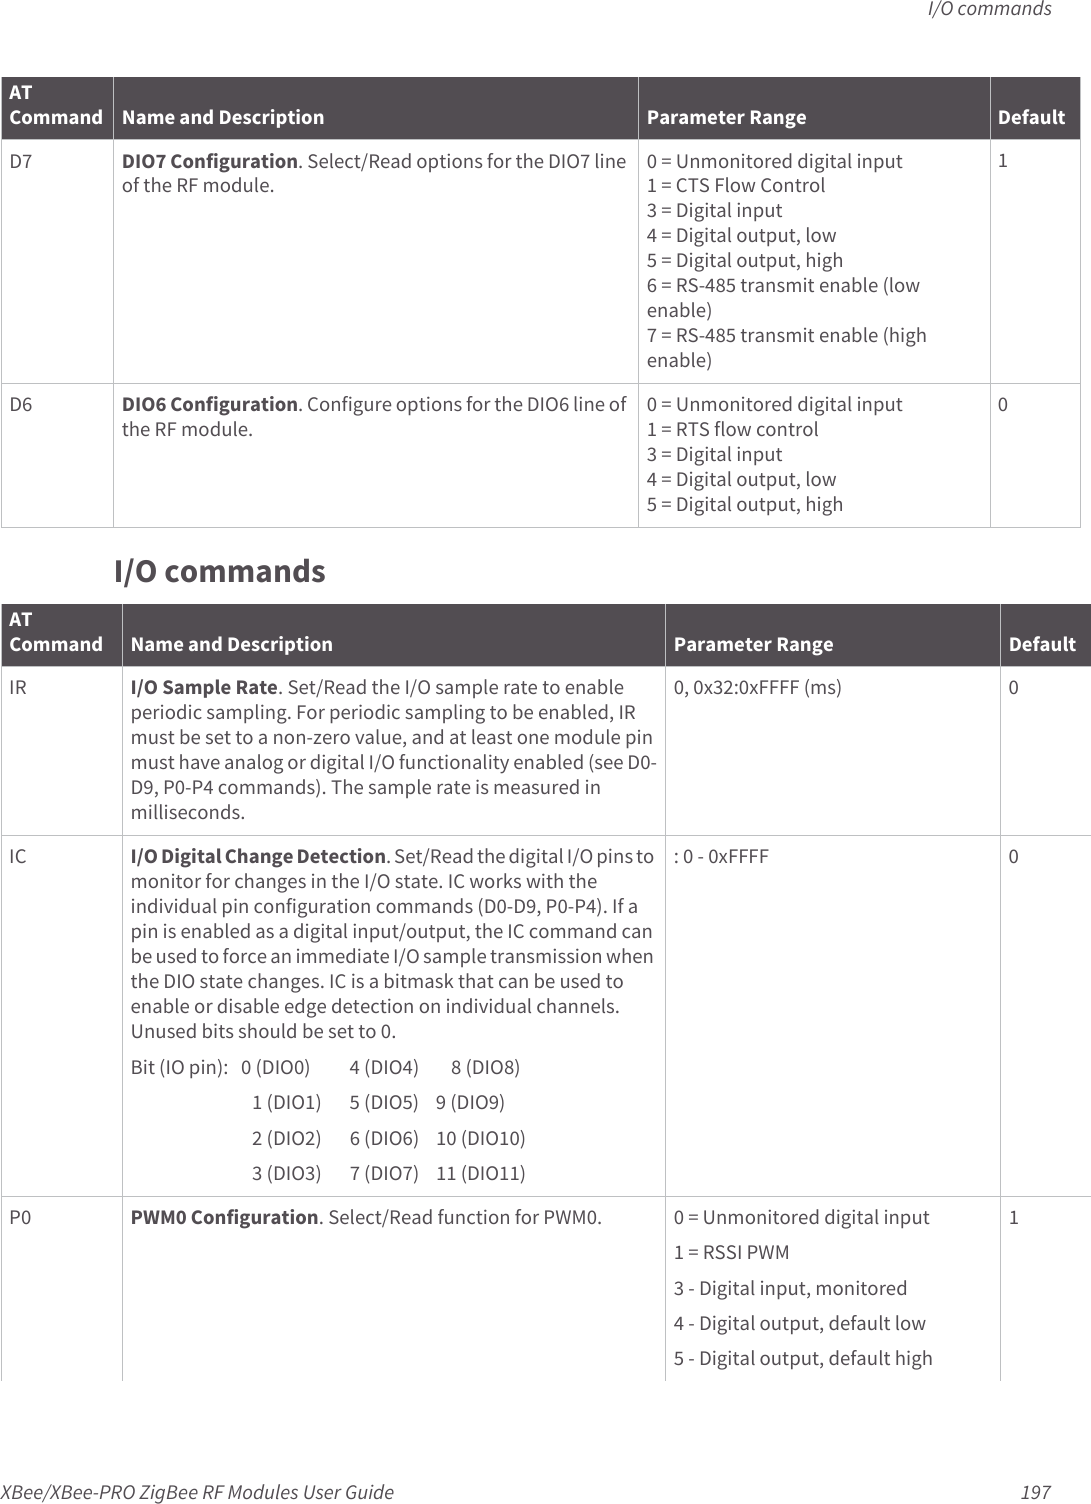 I/O commandsXBee/XBee-PRO ZigBee RF Modules User Guide 197I/O commandsD7 DIO7 Configuration. Select/Read options for the DIO7 line of the RF module.0 = Unmonitored digital input1 = CTS Flow Control3 = Digital input4 = Digital output, low5 = Digital output, high6 = RS-485 transmit enable (low enable)7 = RS-485 transmit enable (high enable)1D6 DIO6 Configuration. Configure options for the DIO6 line of the RF module.0 = Unmonitored digital input1 = RTS flow control3 = Digital input4 = Digital output, low5 = Digital output, high0ATCommand Name and Description Parameter Range DefaultATCommand Name and Description Parameter Range DefaultIR I/O Sample Rate. Set/Read the I/O sample rate to enable periodic sampling. For periodic sampling to be enabled, IR must be set to a non-zero value, and at least one module pin must have analog or digital I/O functionality enabled (see D0-D9, P0-P4 commands). The sample rate is measured in milliseconds.0, 0x32:0xFFFF (ms) 0IC I/O Digital Change Detection. Set/Read the digital I/O pins to monitor for changes in the I/O state. IC works with the individual pin configuration commands (D0-D9, P0-P4). If a pin is enabled as a digital input/output, the IC command can be used to force an immediate I/O sample transmission when the DIO state changes. IC is a bitmask that can be used to enable or disable edge detection on individual channels. Unused bits should be set to 0.Bit (IO pin):   0 (DIO0) 4 (DIO4) 8 (DIO8)1 (DIO1)  5 (DIO5)    9 (DIO9)2 (DIO2)  6 (DIO6)    10 (DIO10)3 (DIO3)  7 (DIO7)    11 (DIO11): 0 - 0xFFFF 0P0 PWM0 Configuration. Select/Read function for PWM0. 0 = Unmonitored digital input1 = RSSI PWM3 - Digital input, monitored4 - Digital output, default low5 - Digital output, default high1